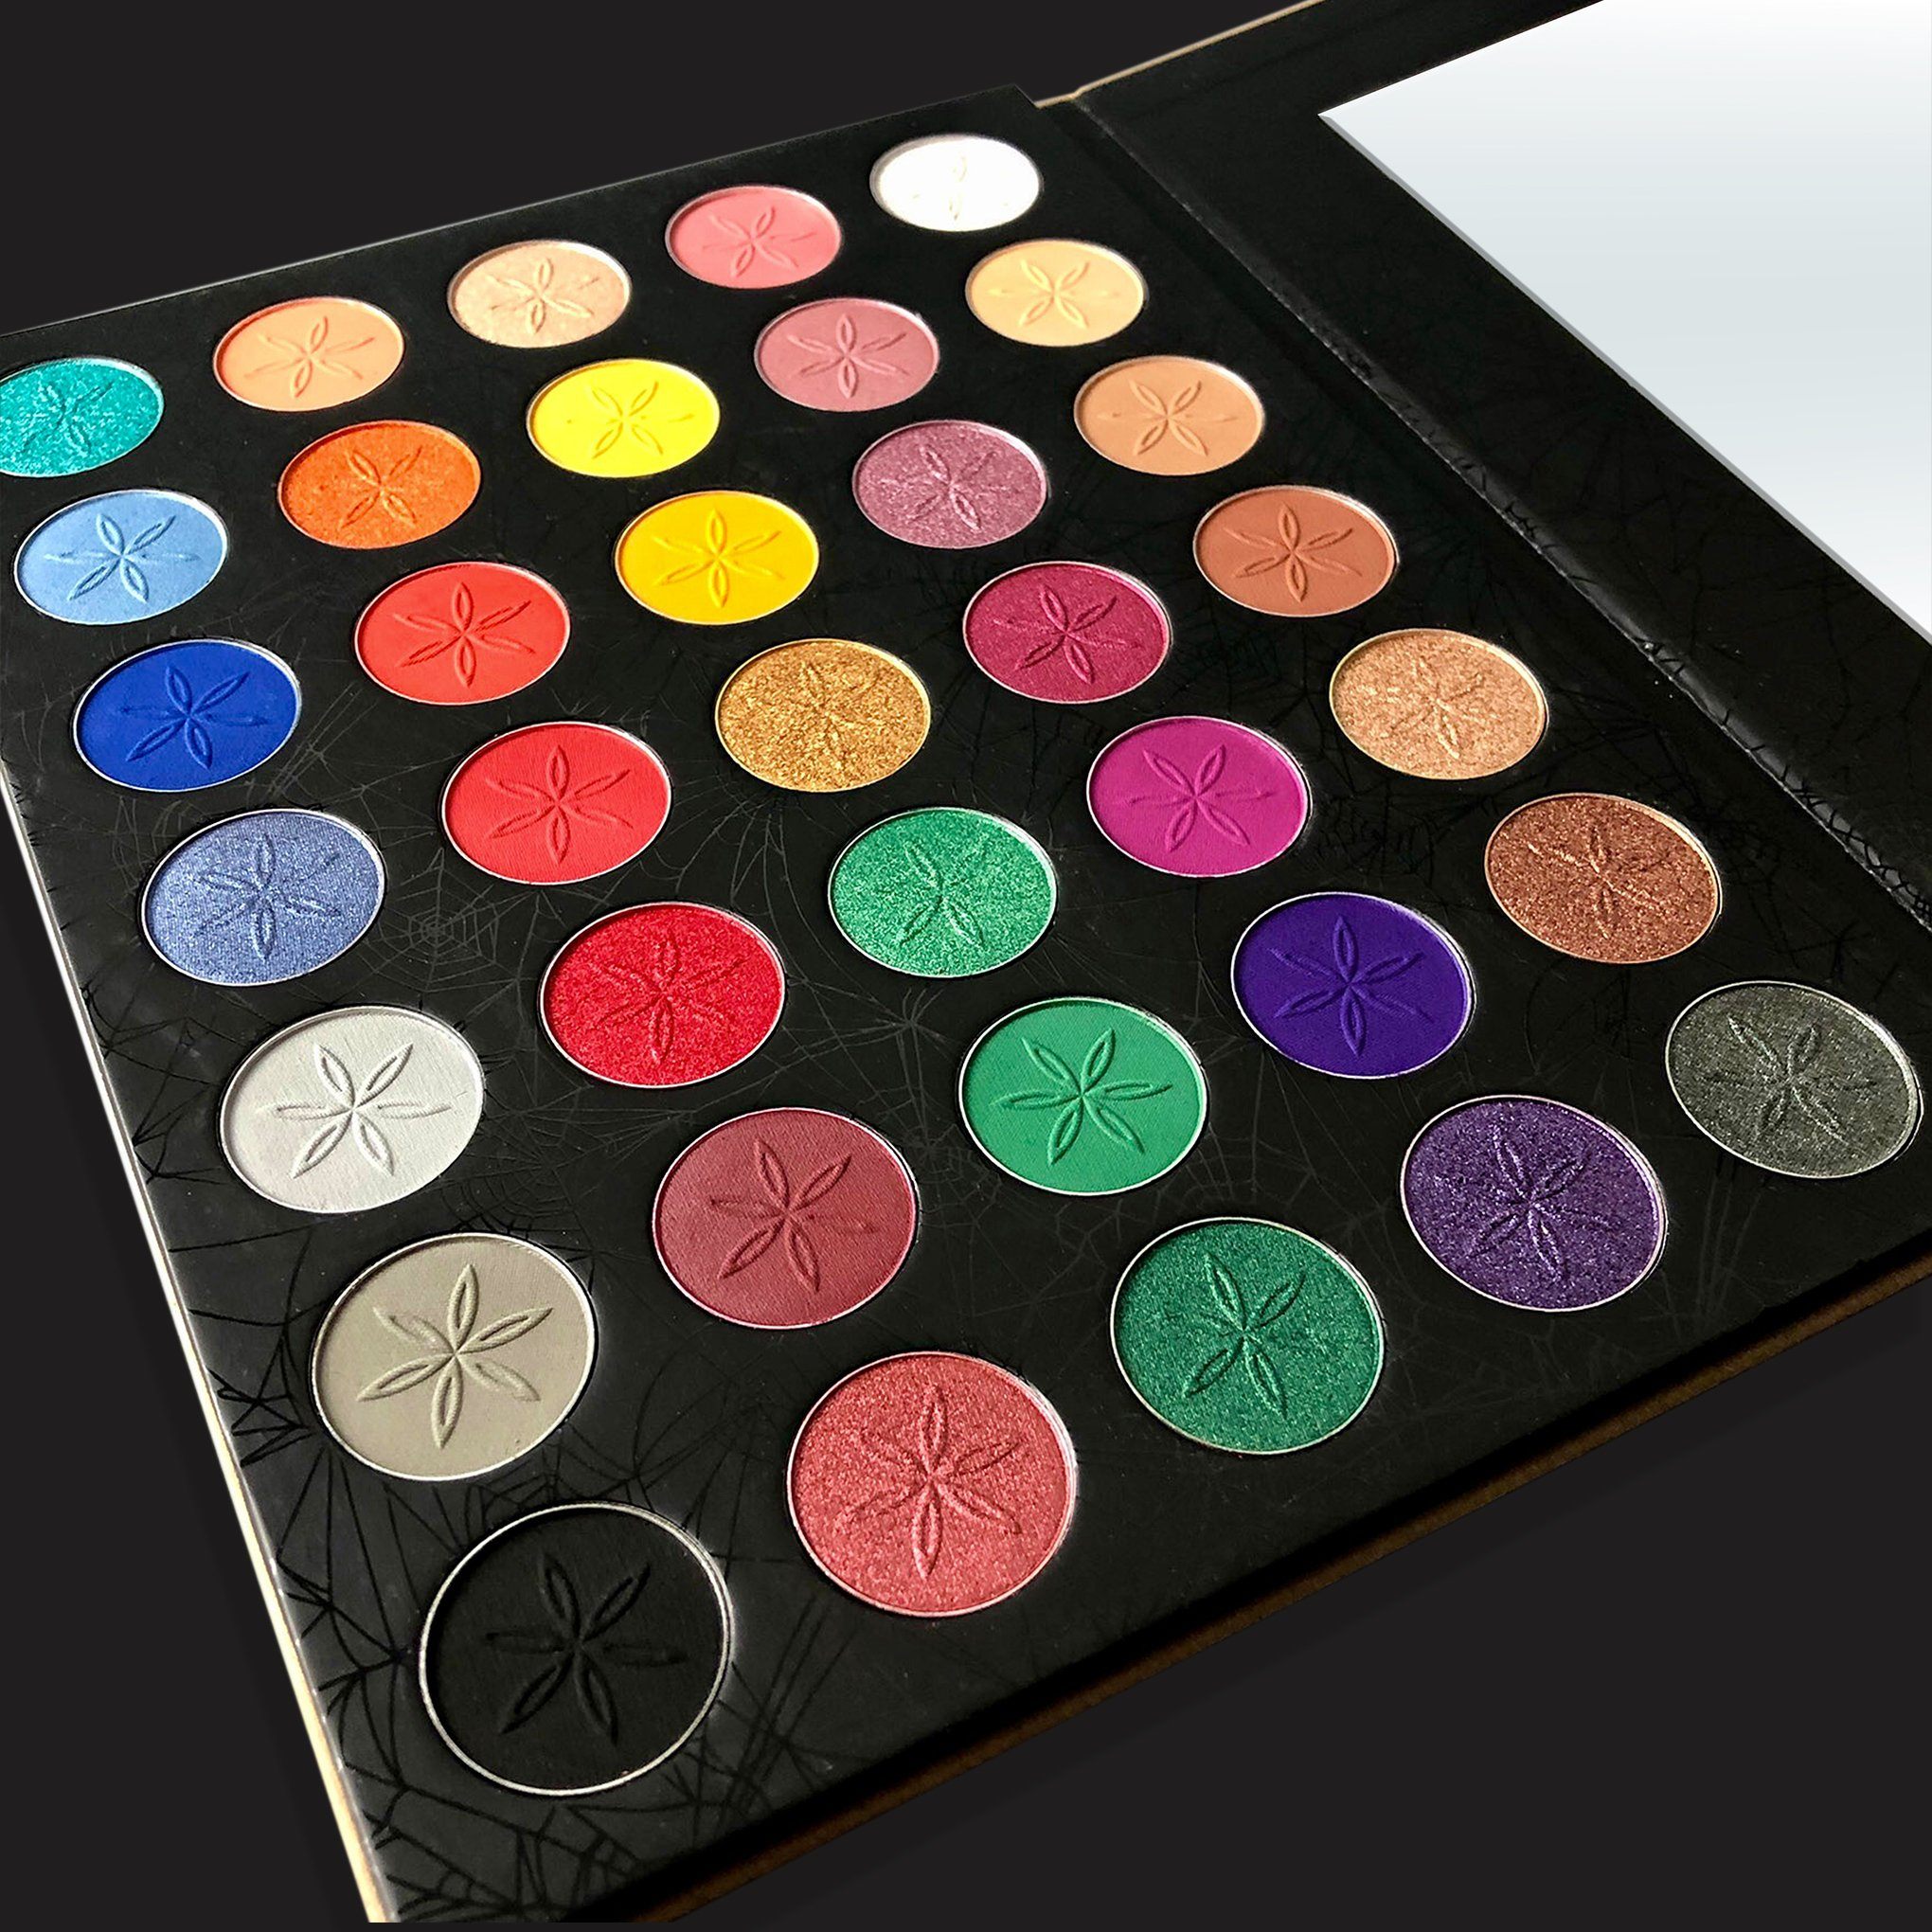 Slay With Dragons 35 Piece Eyeshadow Makeup Palette Seven and Six Cosmetics 